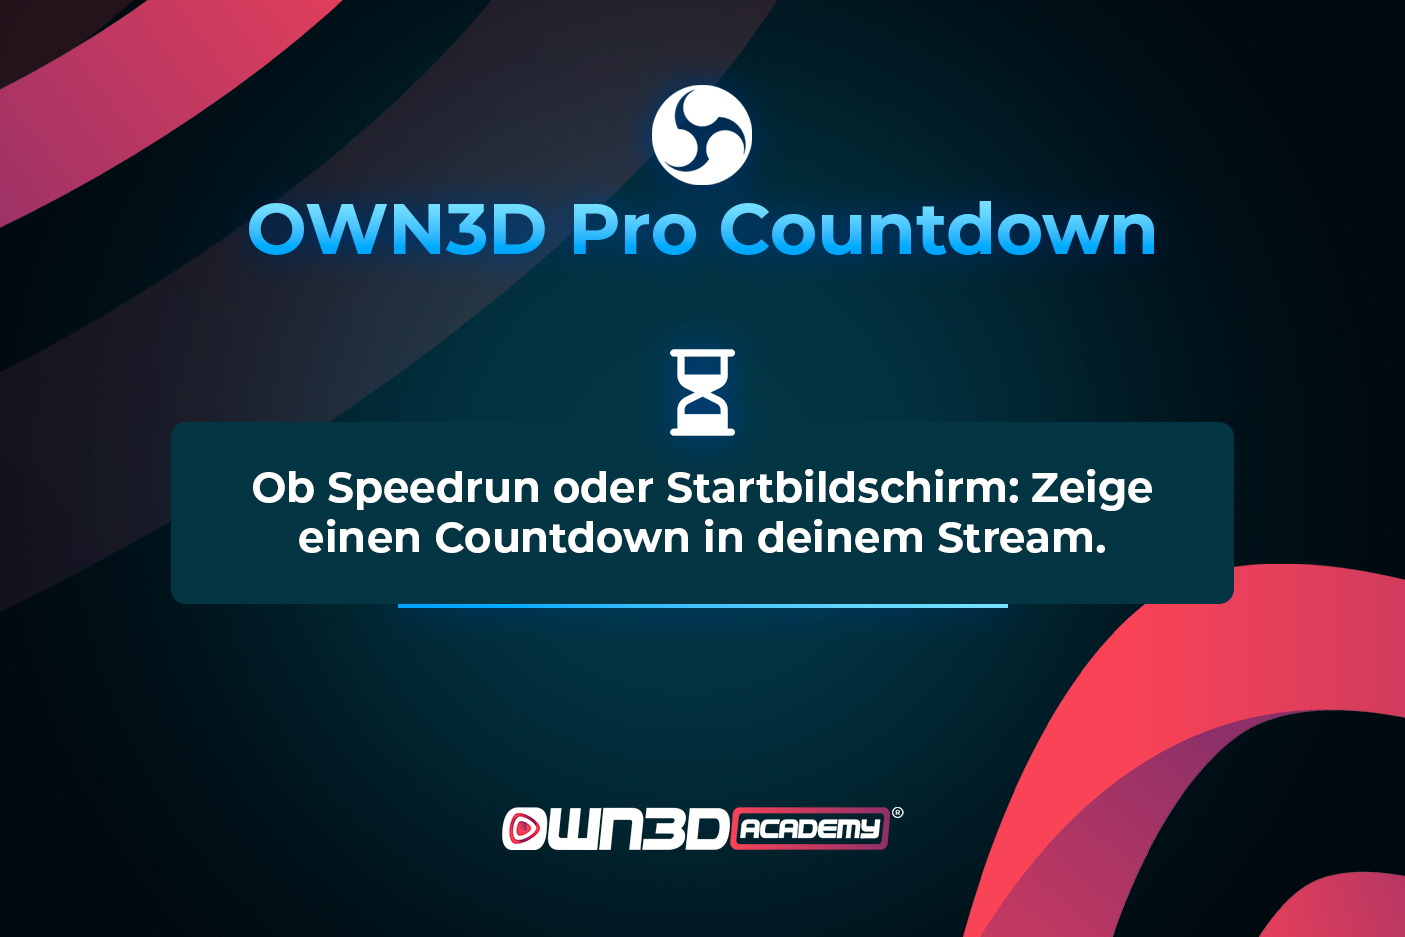 7. OWN3D-tv-Setup-course_GER_overall lessons- OWN3D Pro Countdown.jpg